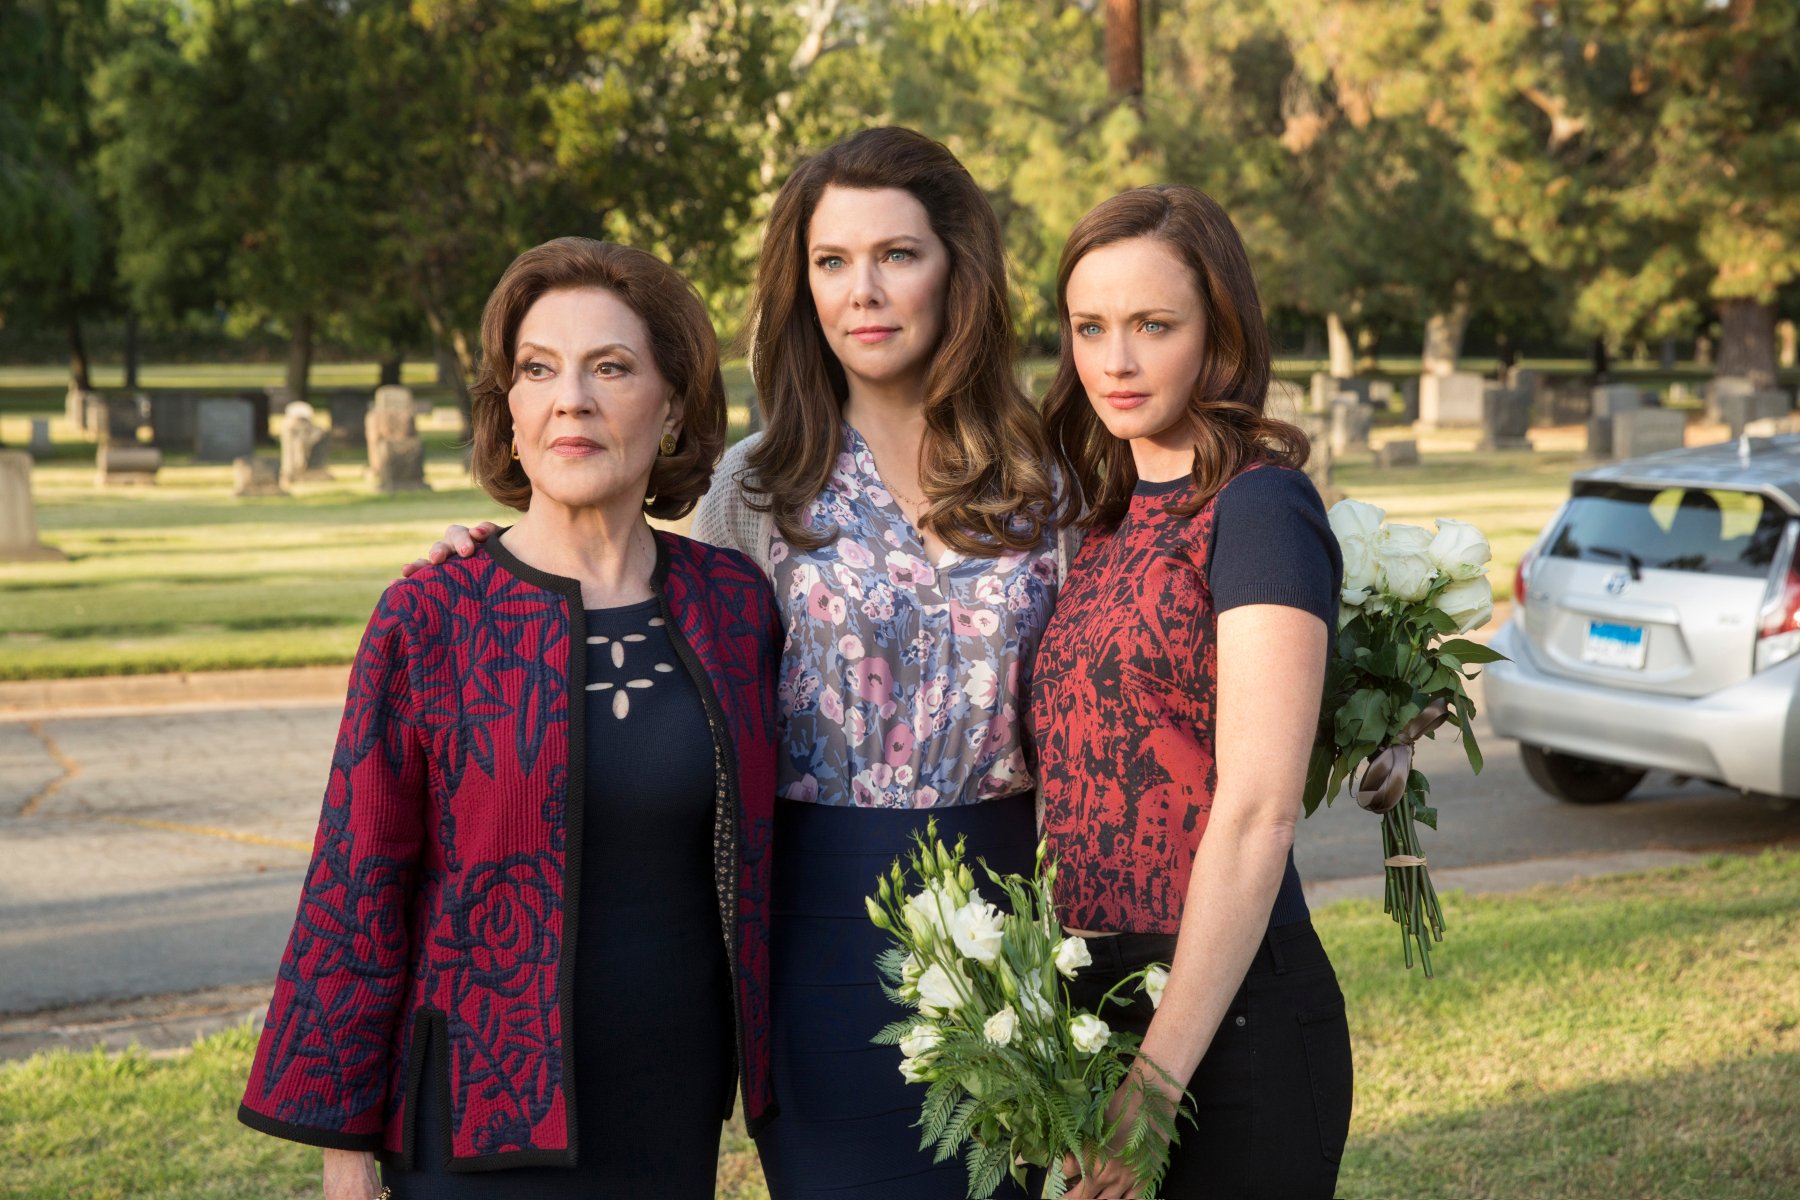 Kelly Bishop, Lauren Graham, and Alexis Bledel as Emily, Lorelai, and Rory in 'Gilmore Girls: A Year in the Life' for our article about lines from the original show. They're standing together outside, and Rory is holding white flowers.